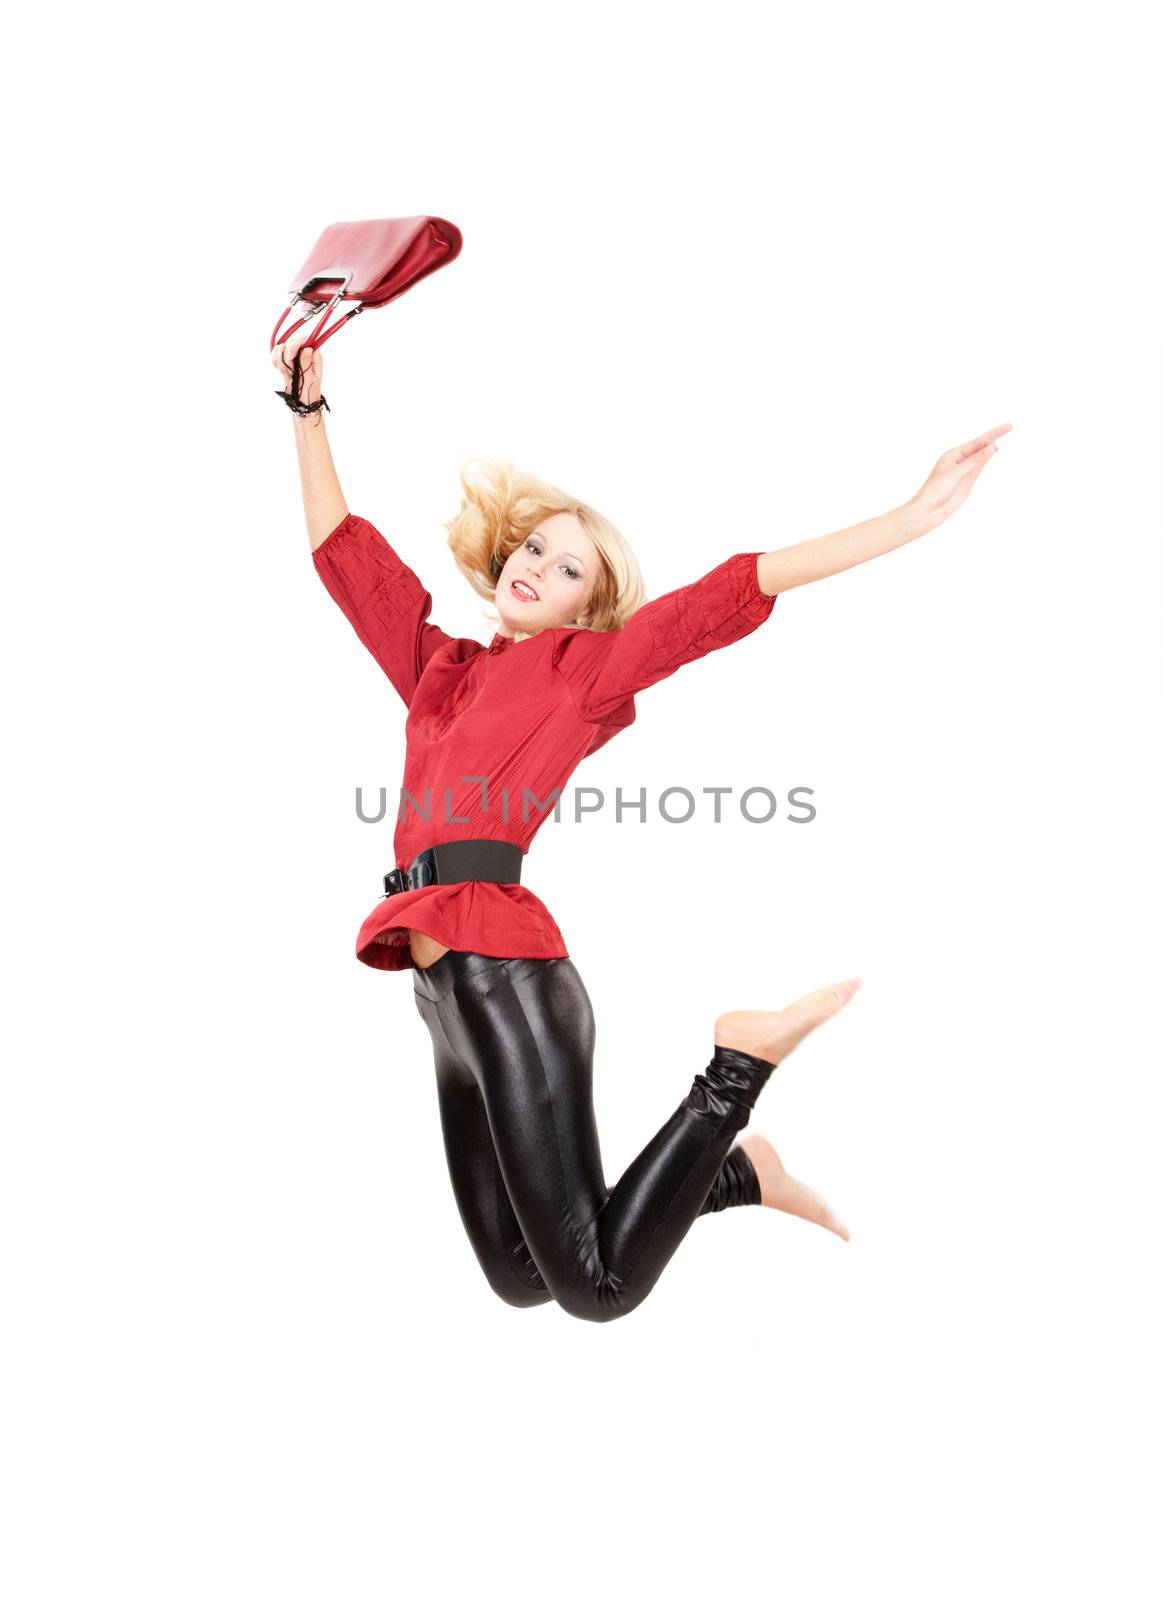 Jumping woman in red top and black leggins over white isolated background